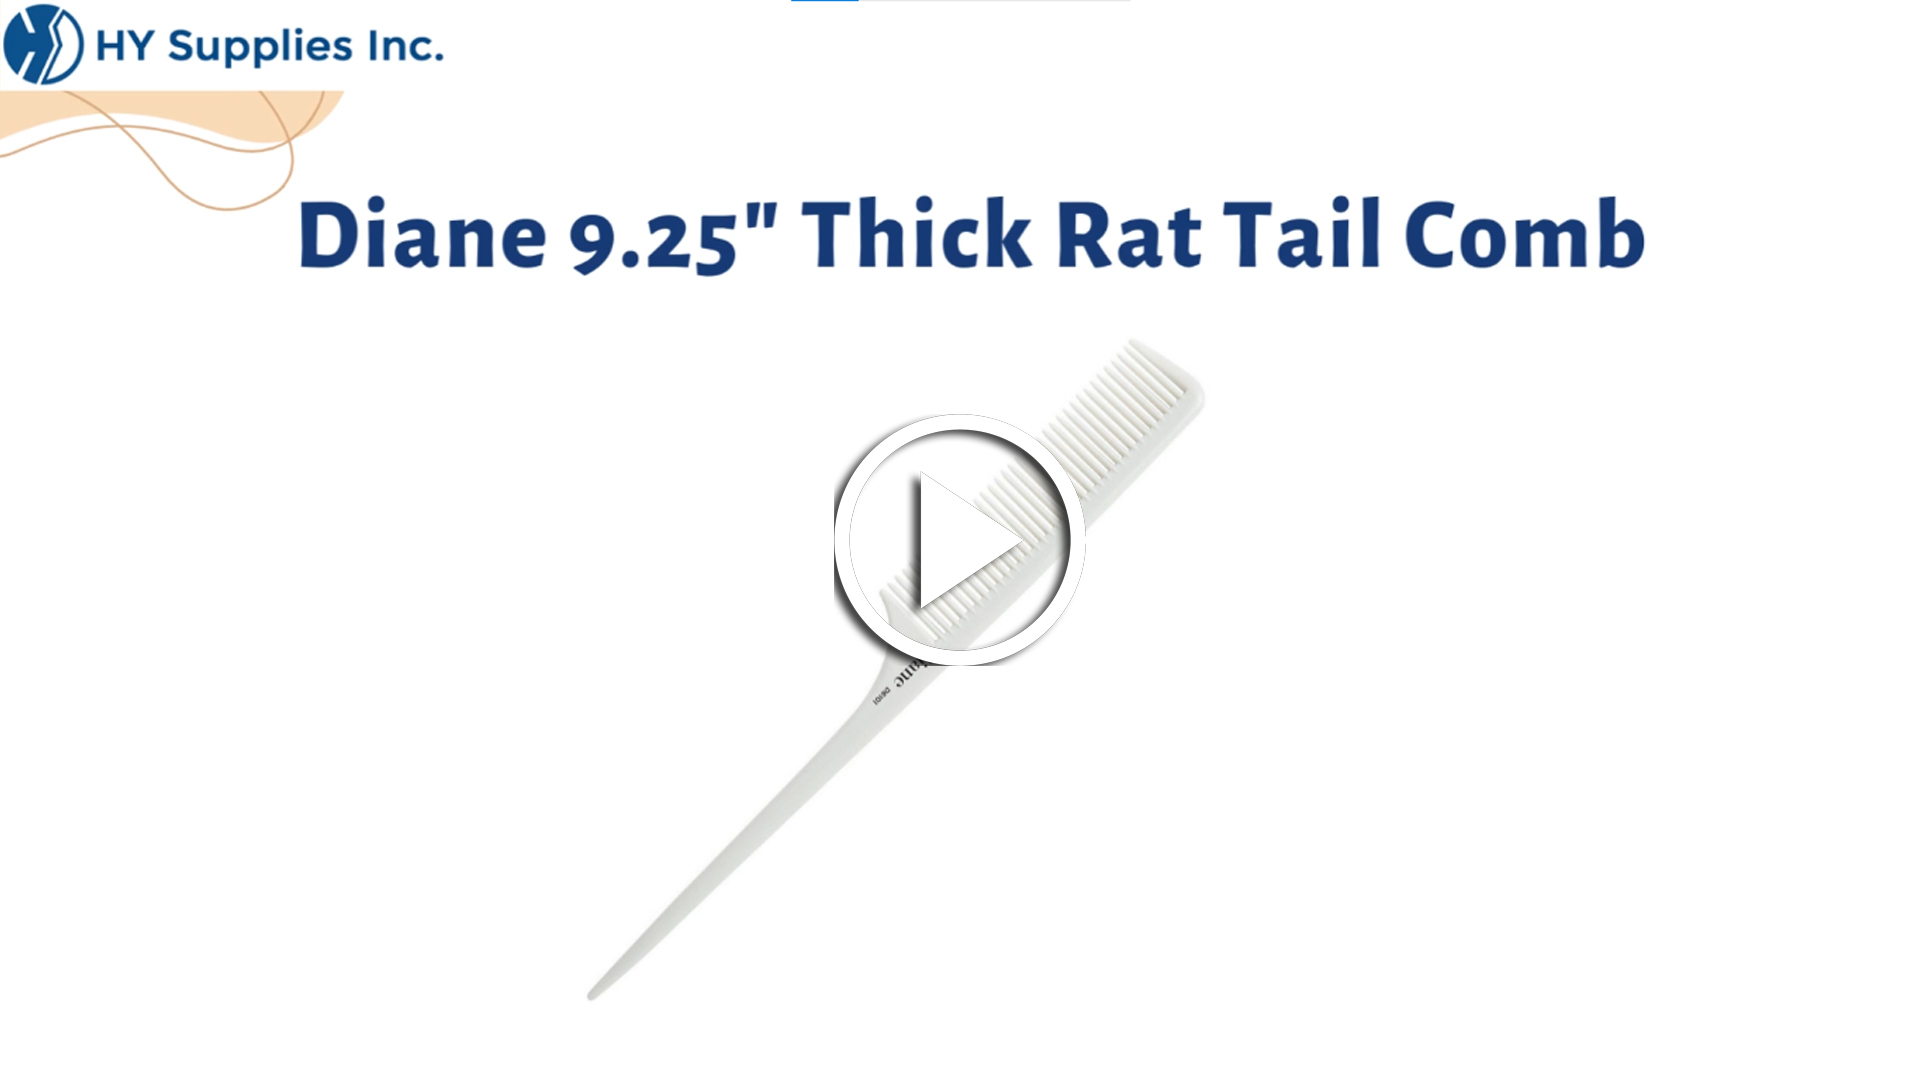 Diane 9.25"" Thick Rat Tail Comb 